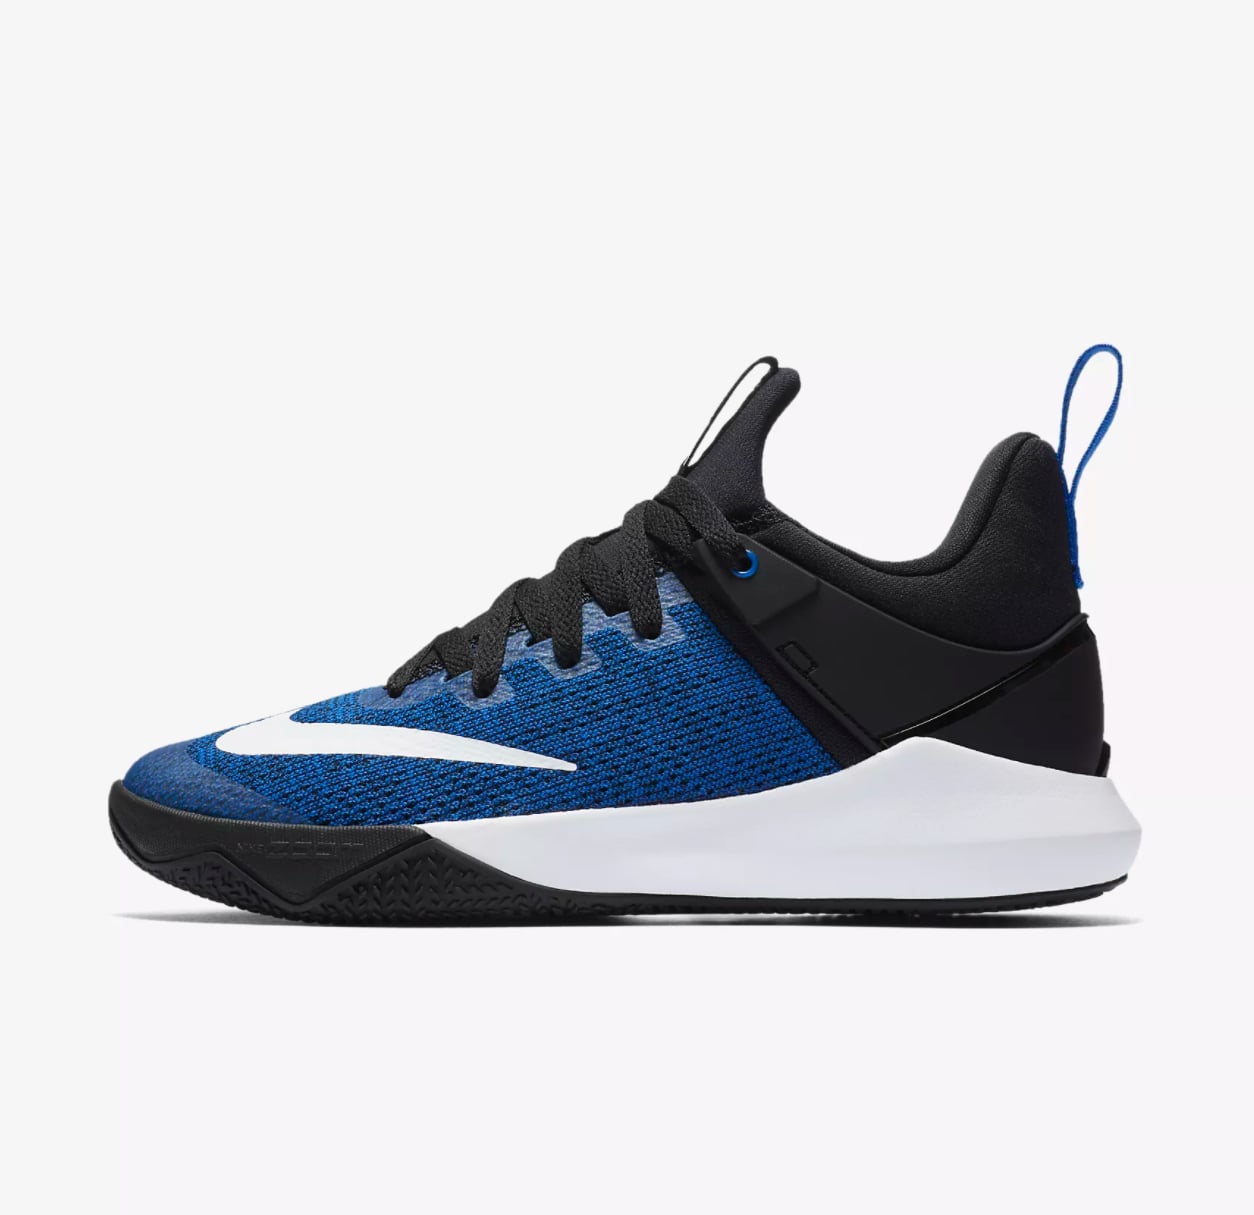 Reprimir Popa Feudo Nike Zoom Shift Women's Basketball Shoes | Important Shoe News! We Have the  Ultimate Sneaker Gift Guide — See 33 Cool Pairs | POPSUGAR Fitness Photo 28